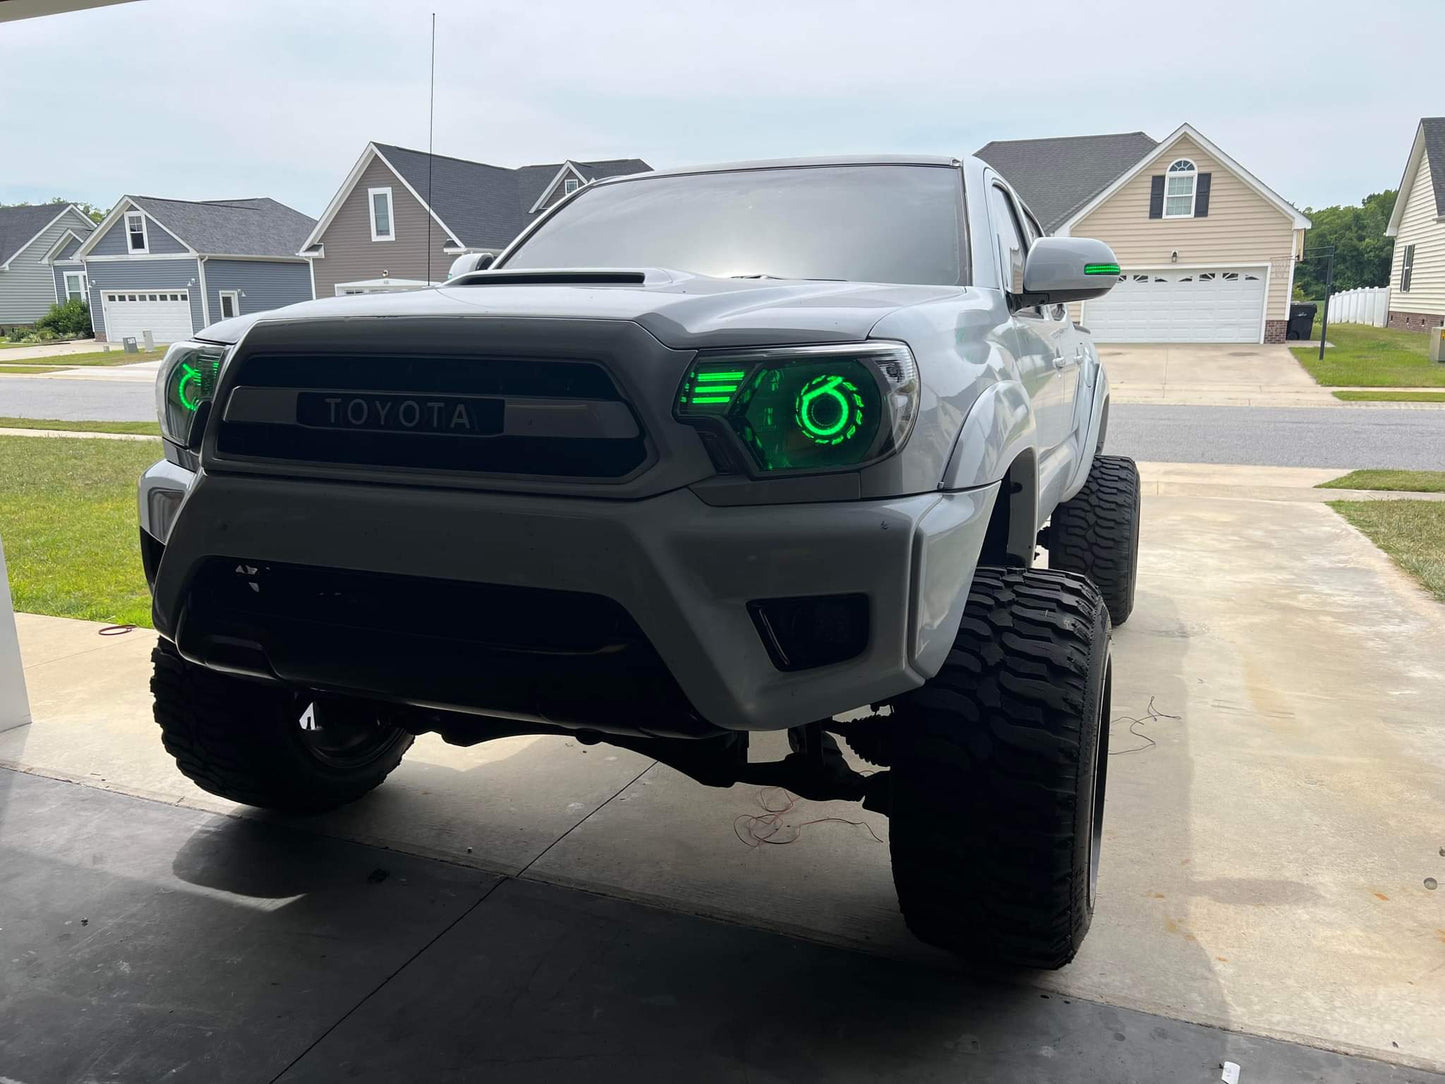 Angry Eye RGB Halos - Includes Controller With DRL and Turn Signal Inputs